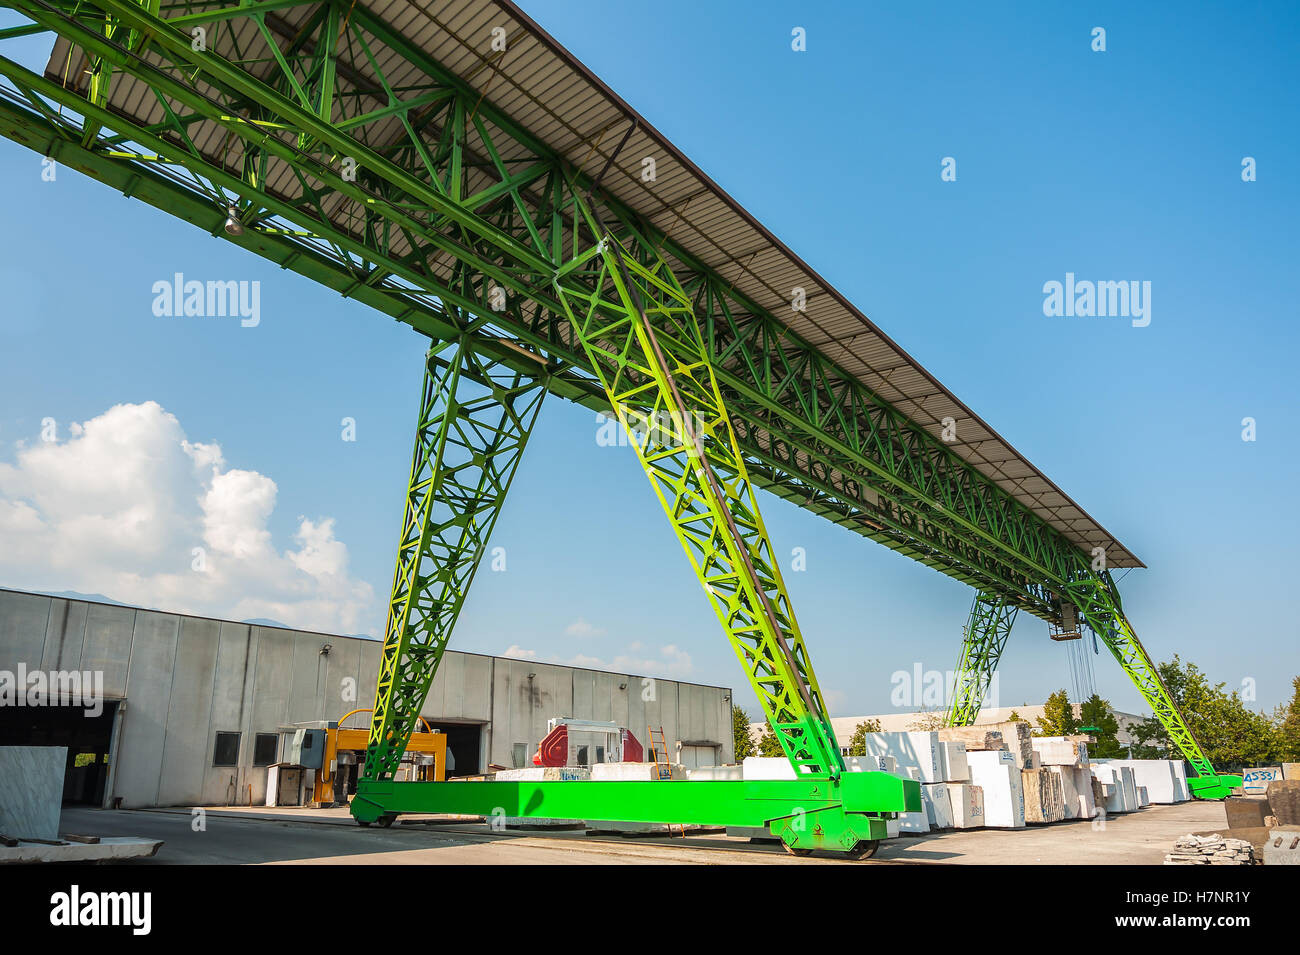 Green gantry crane at work in a warehouse of marble blocks Stock Photo